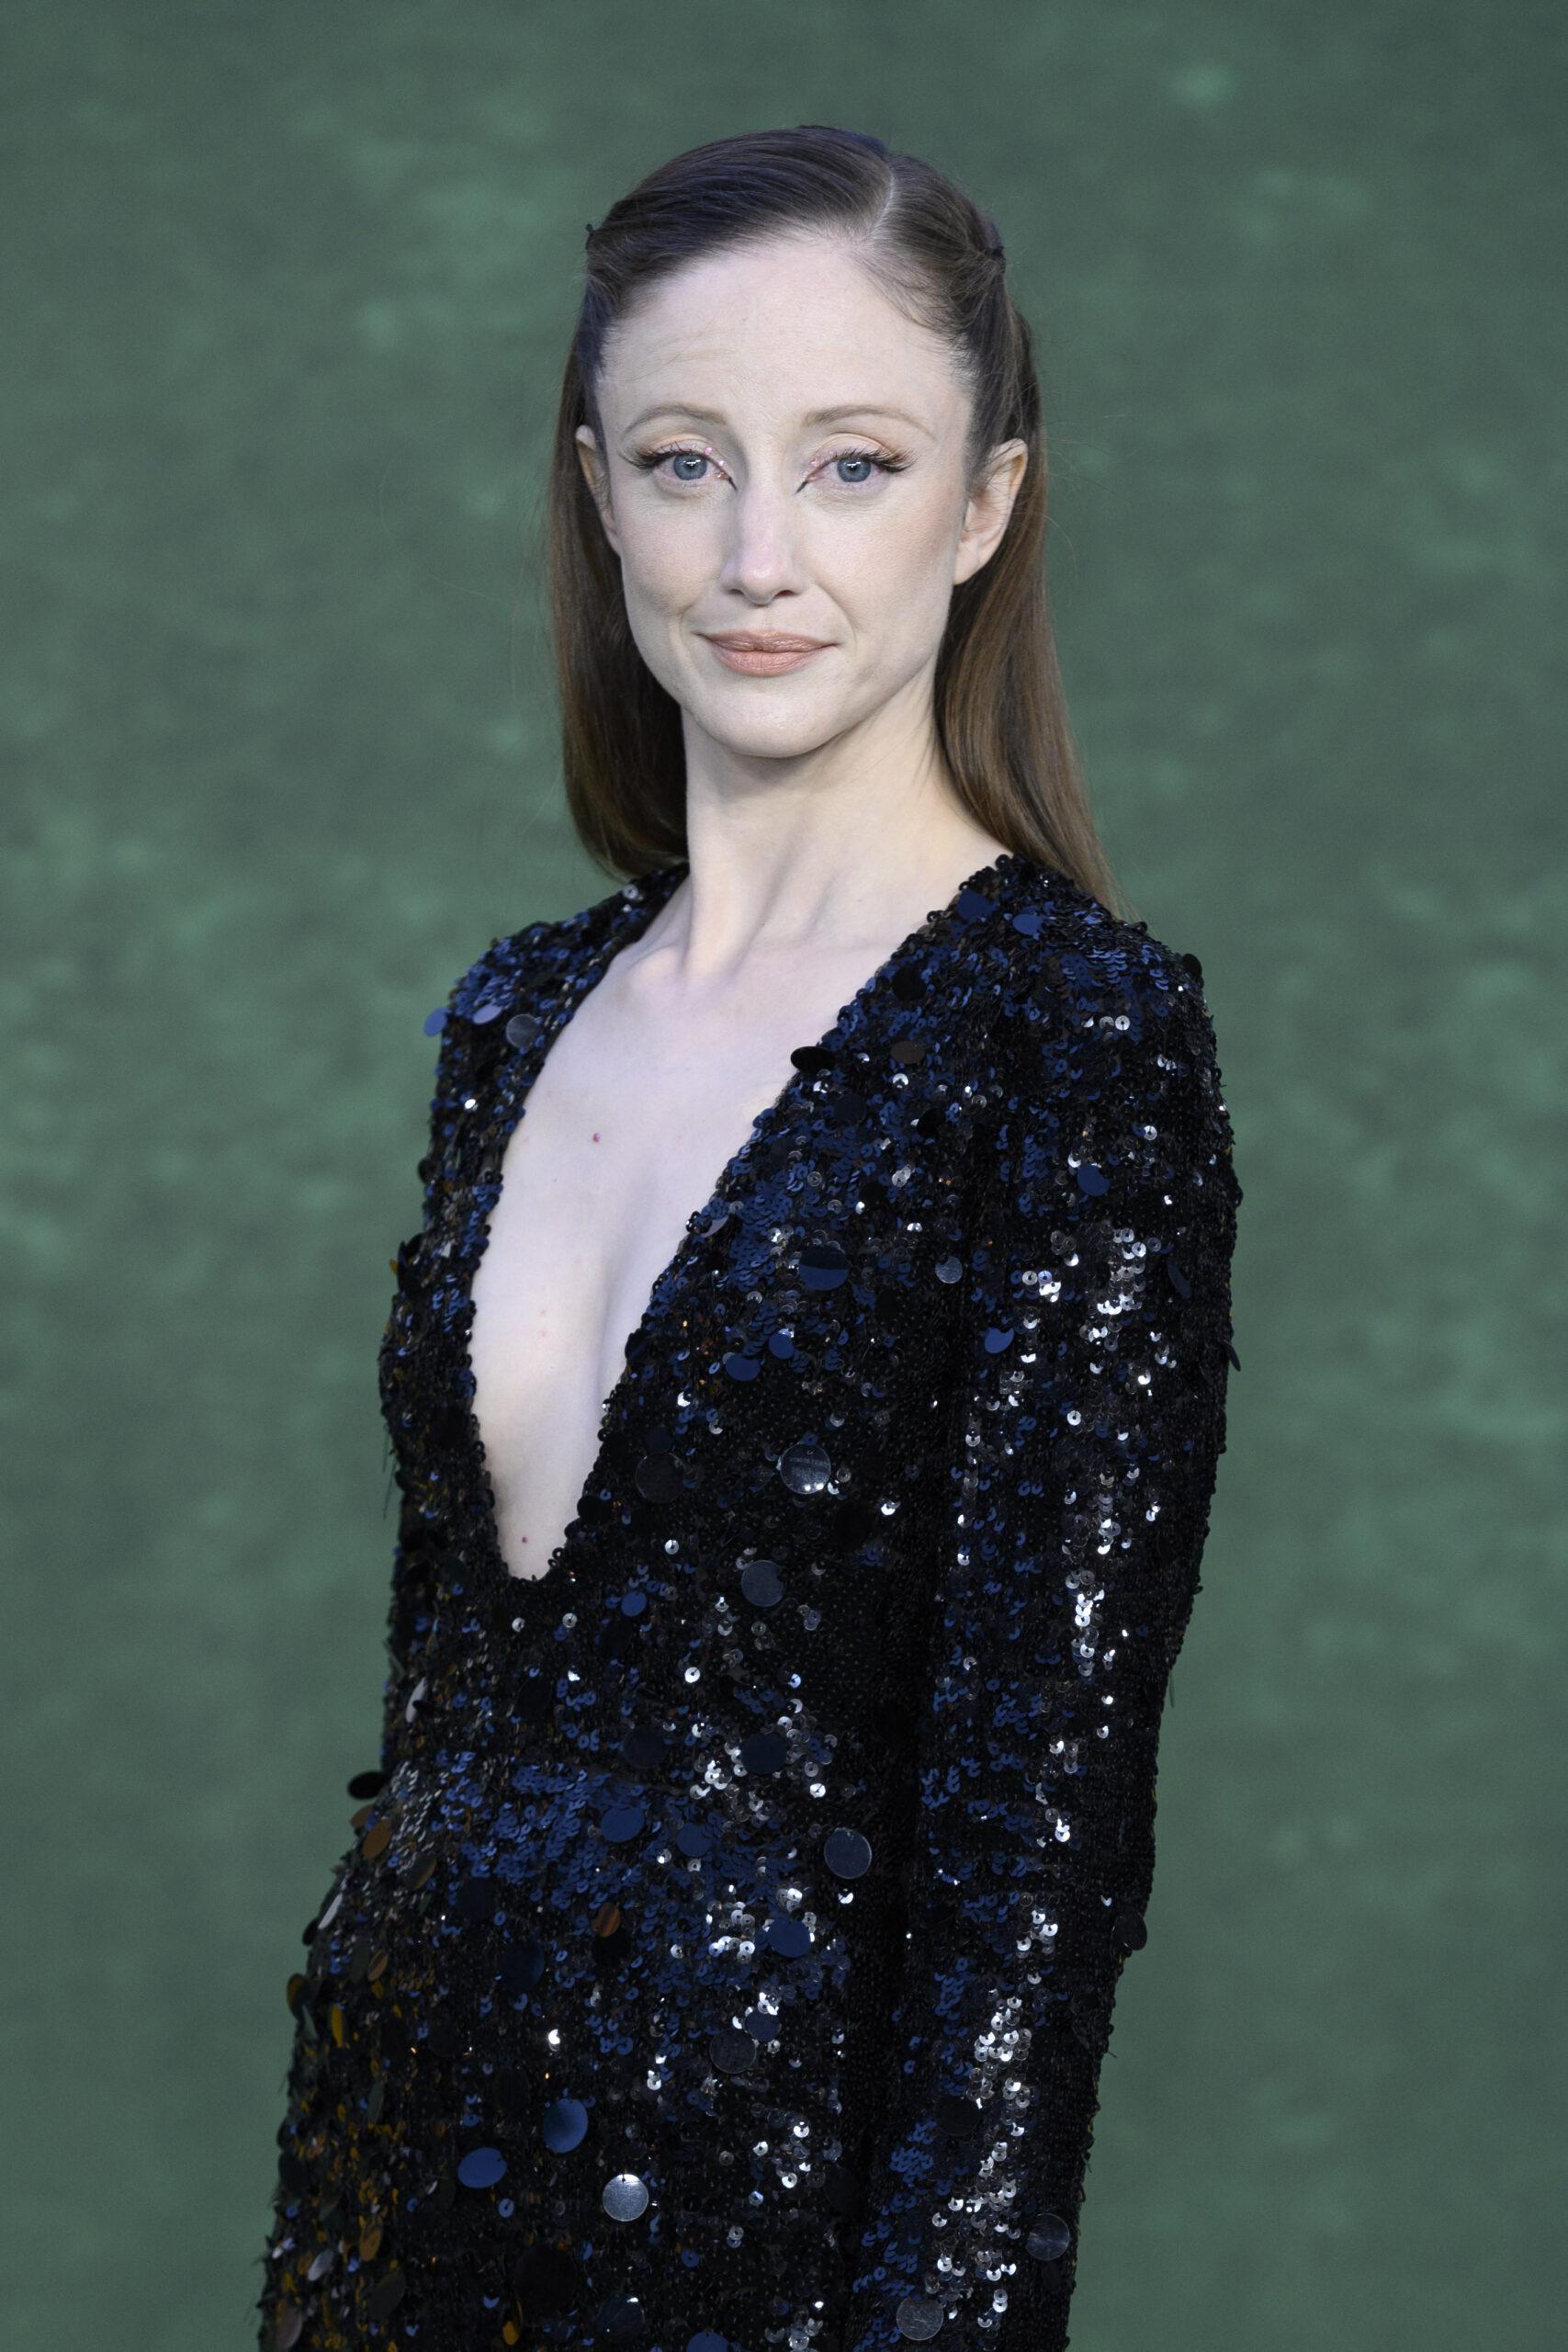 Andrea Riseborough attends the Amsterdam European Premiere at the Odeon Luxe Leicester Square, London.